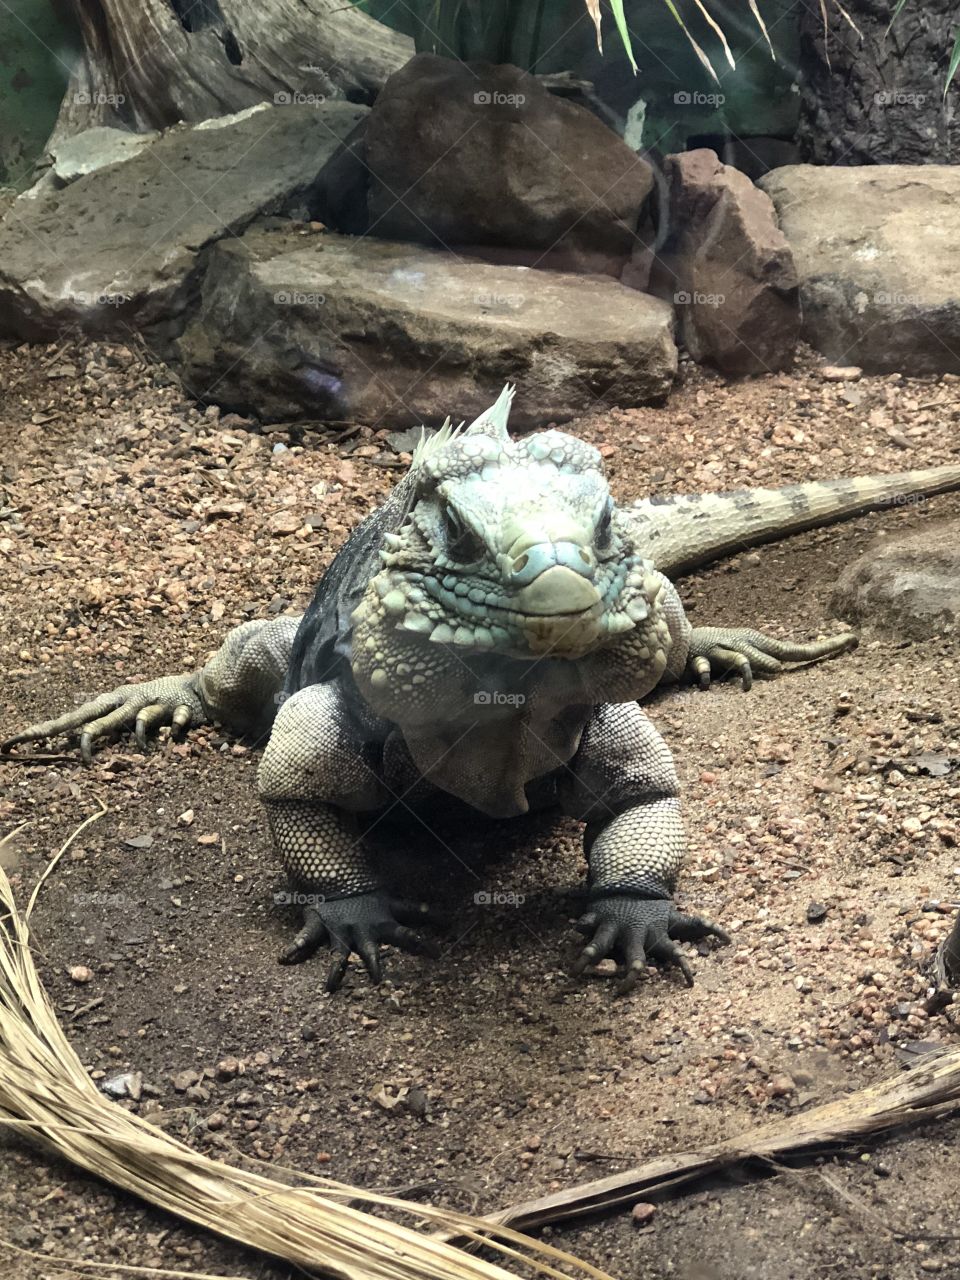 Iguana at the zoo giving us a smile